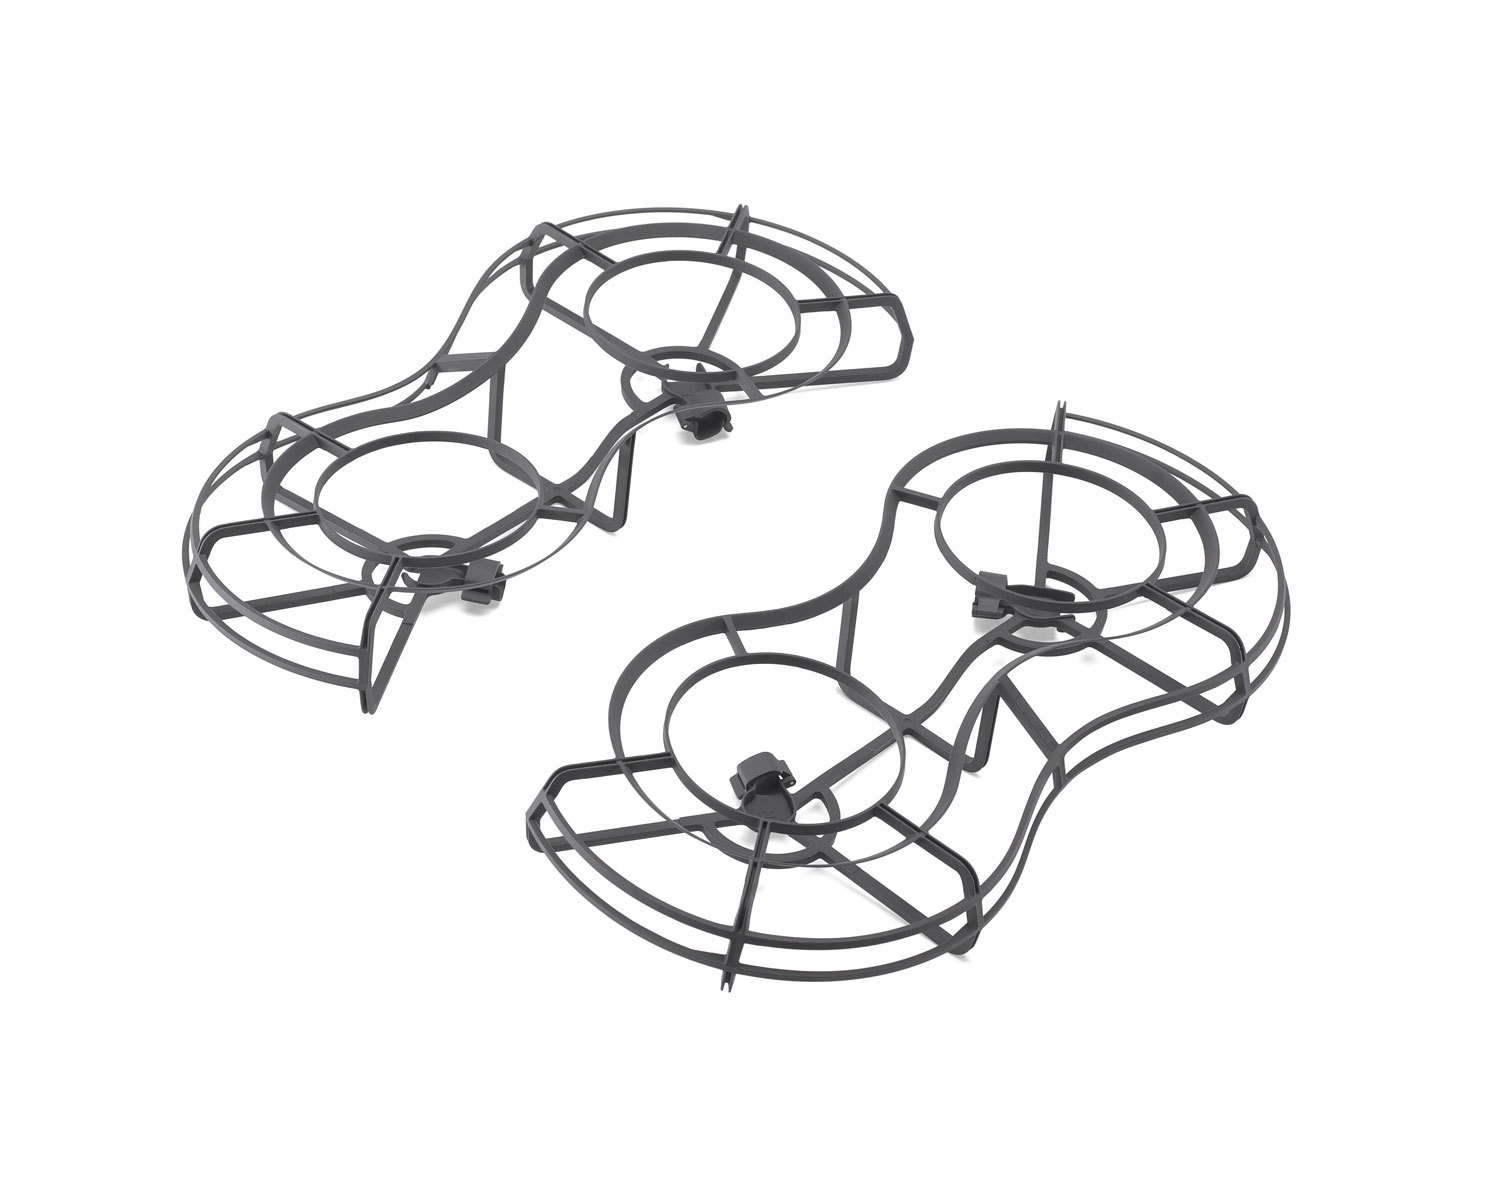 Stabilizer holder All-in-one protection Propellers Sensors for DJI Mini 4  Pro drone - Maison Du Drone